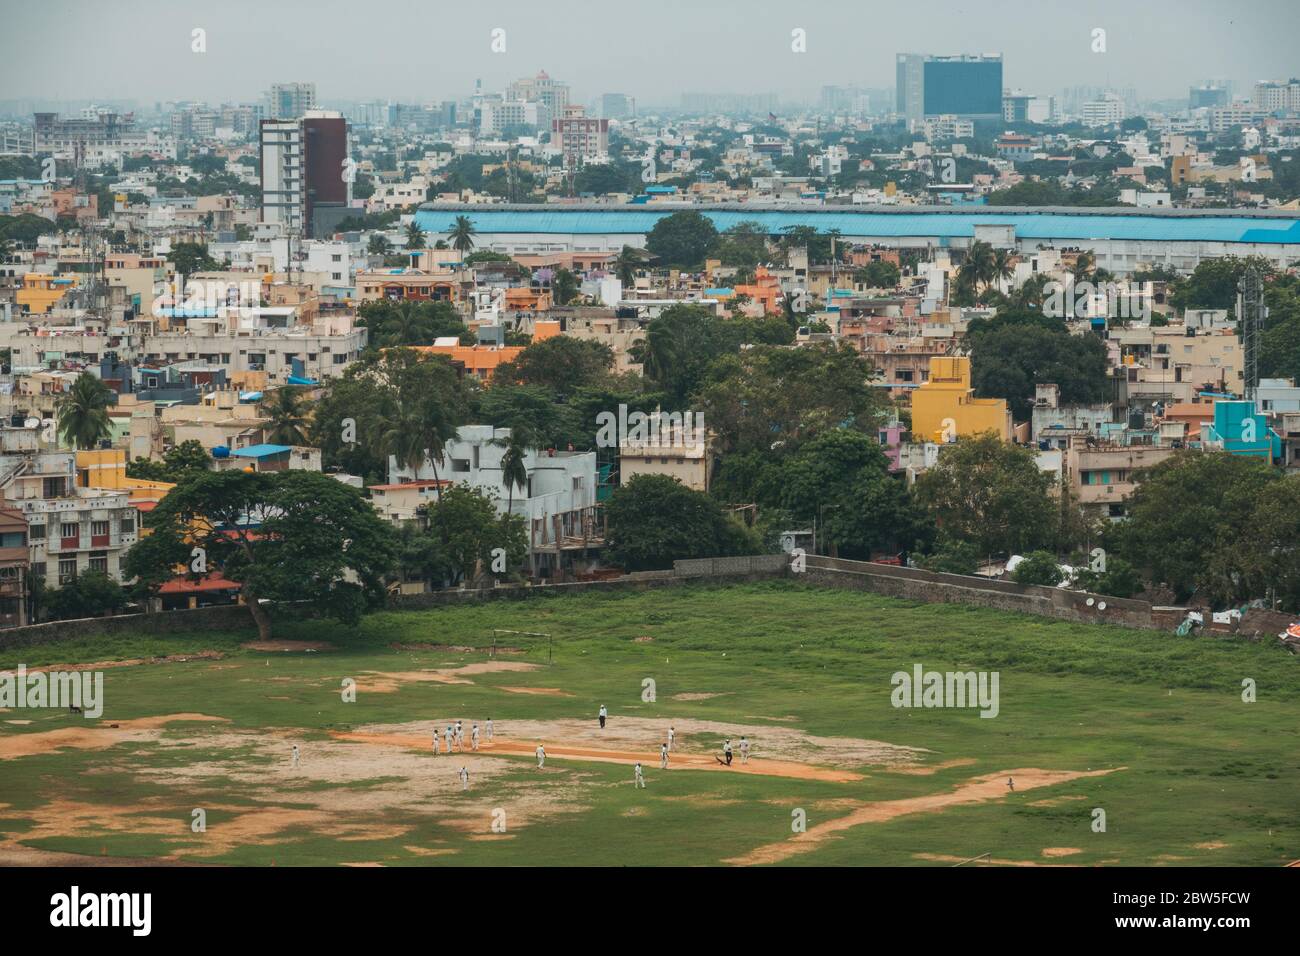 Men playing cricket in some grounds in Chennai, India Stock Photo